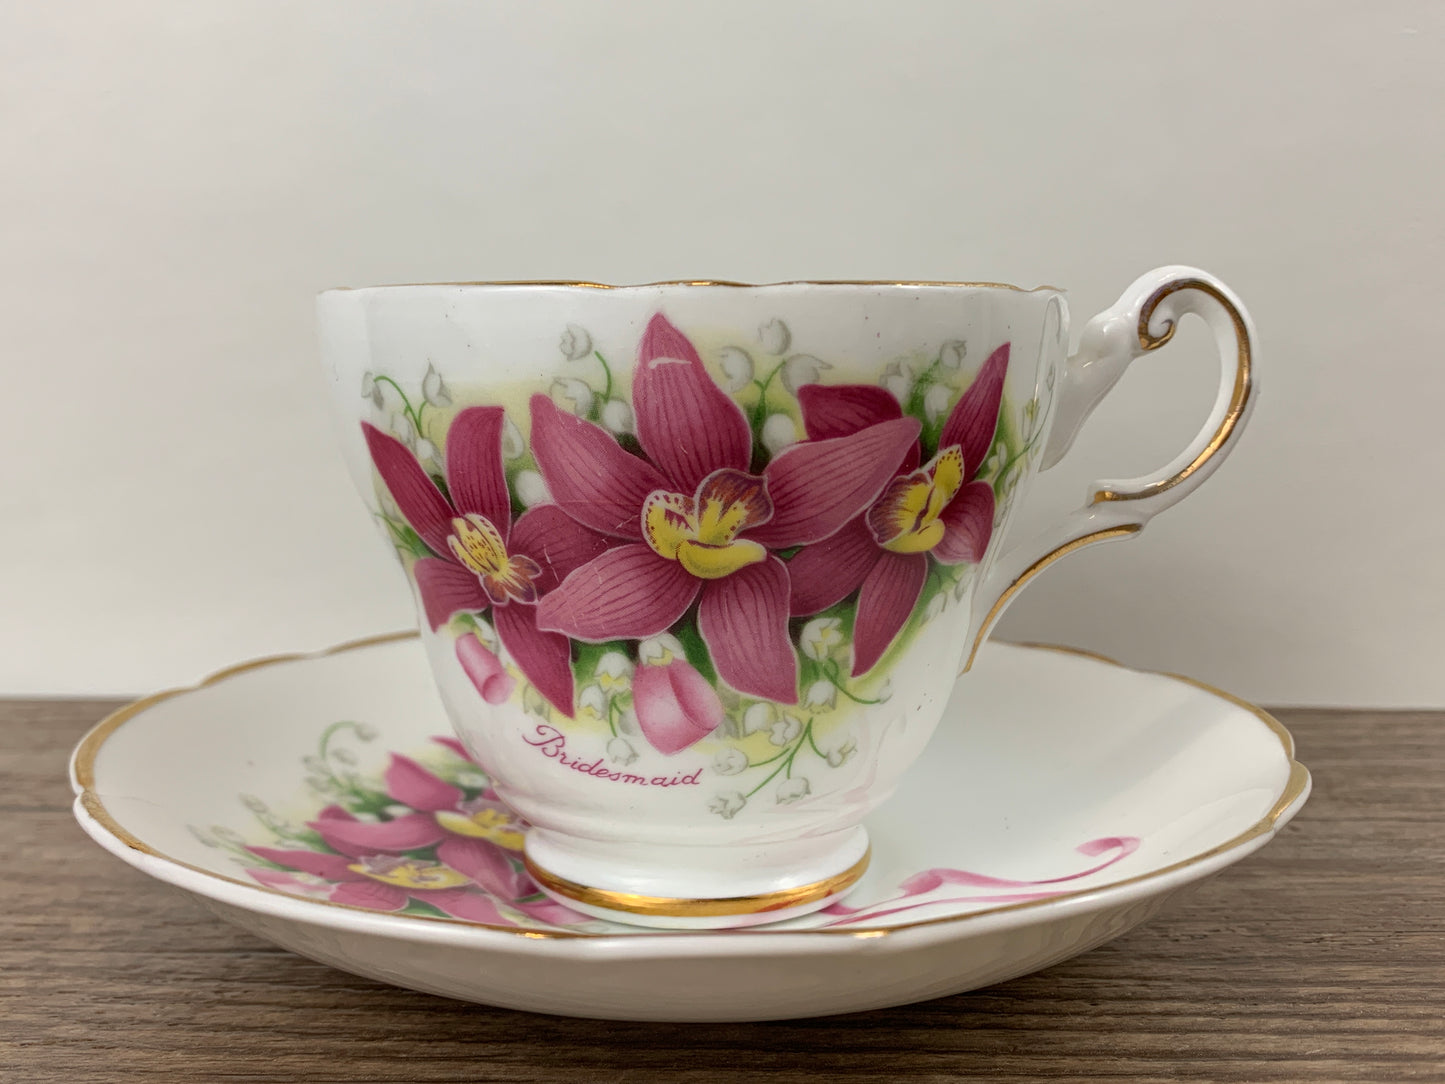 Pink Bridesmaid Pattern Teacup and Saucer with Pink Flowers